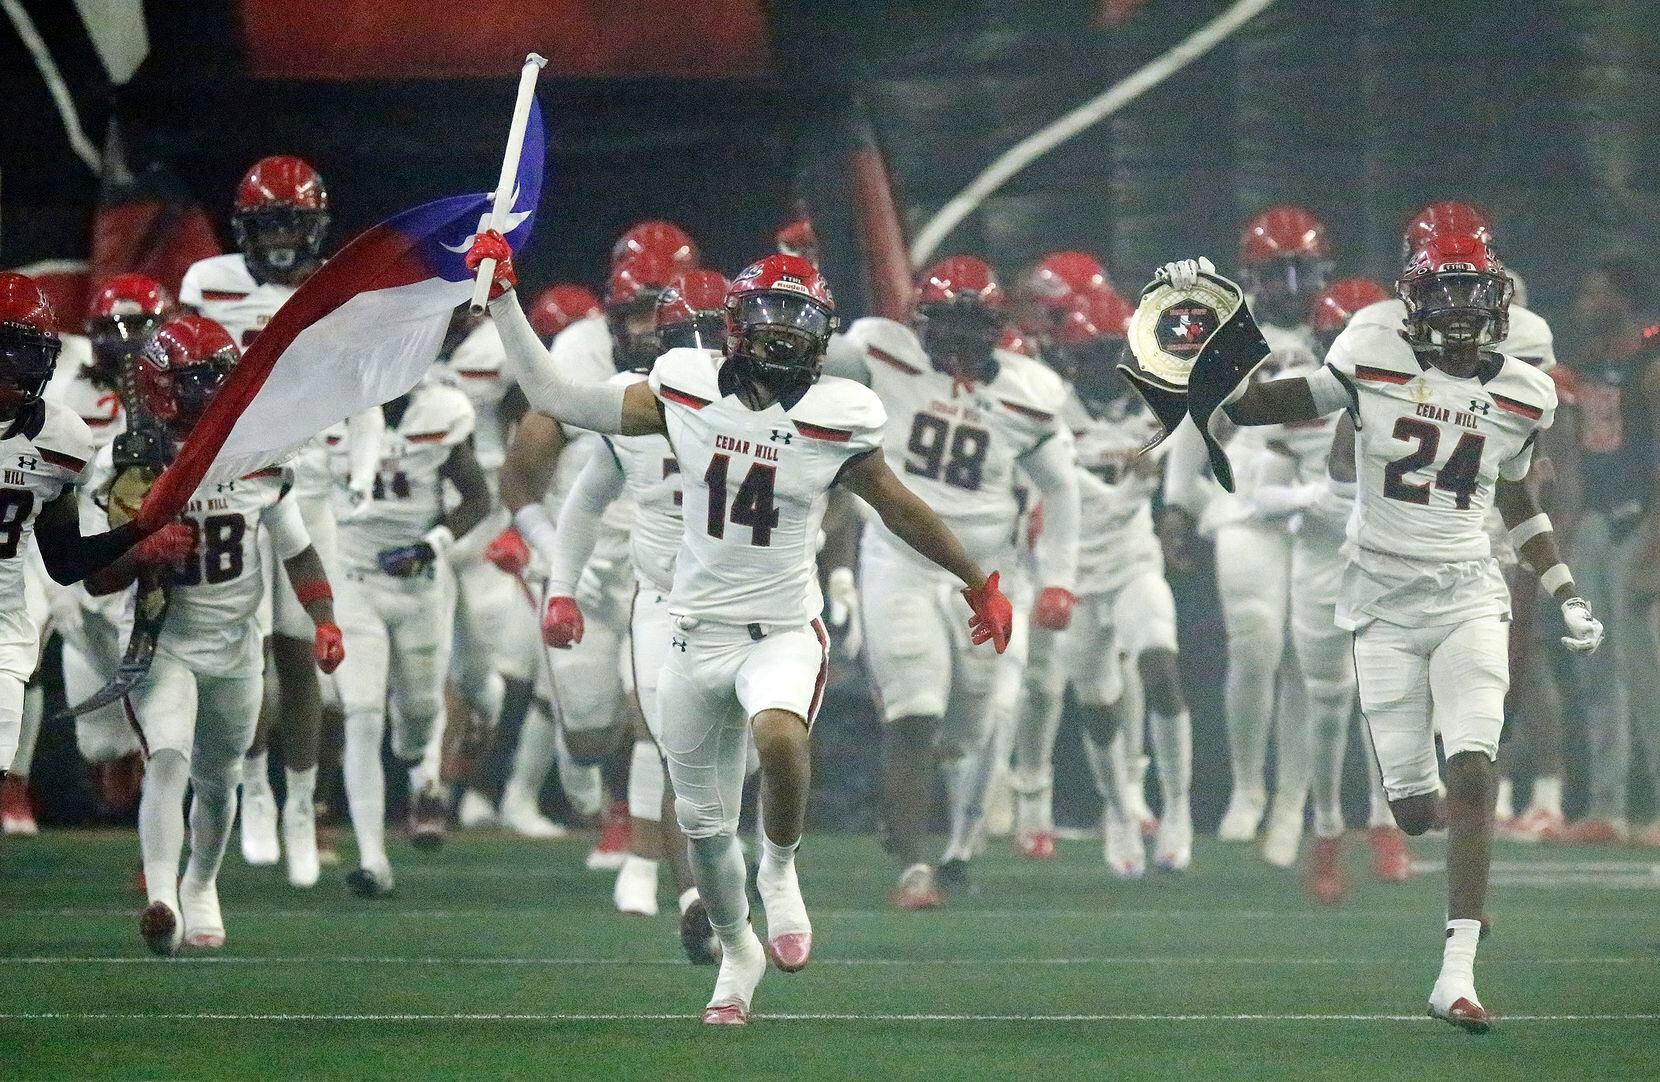 Cedar Hill wide receiver Derrick Wagoner (14) leads his team onto the field as part of the...